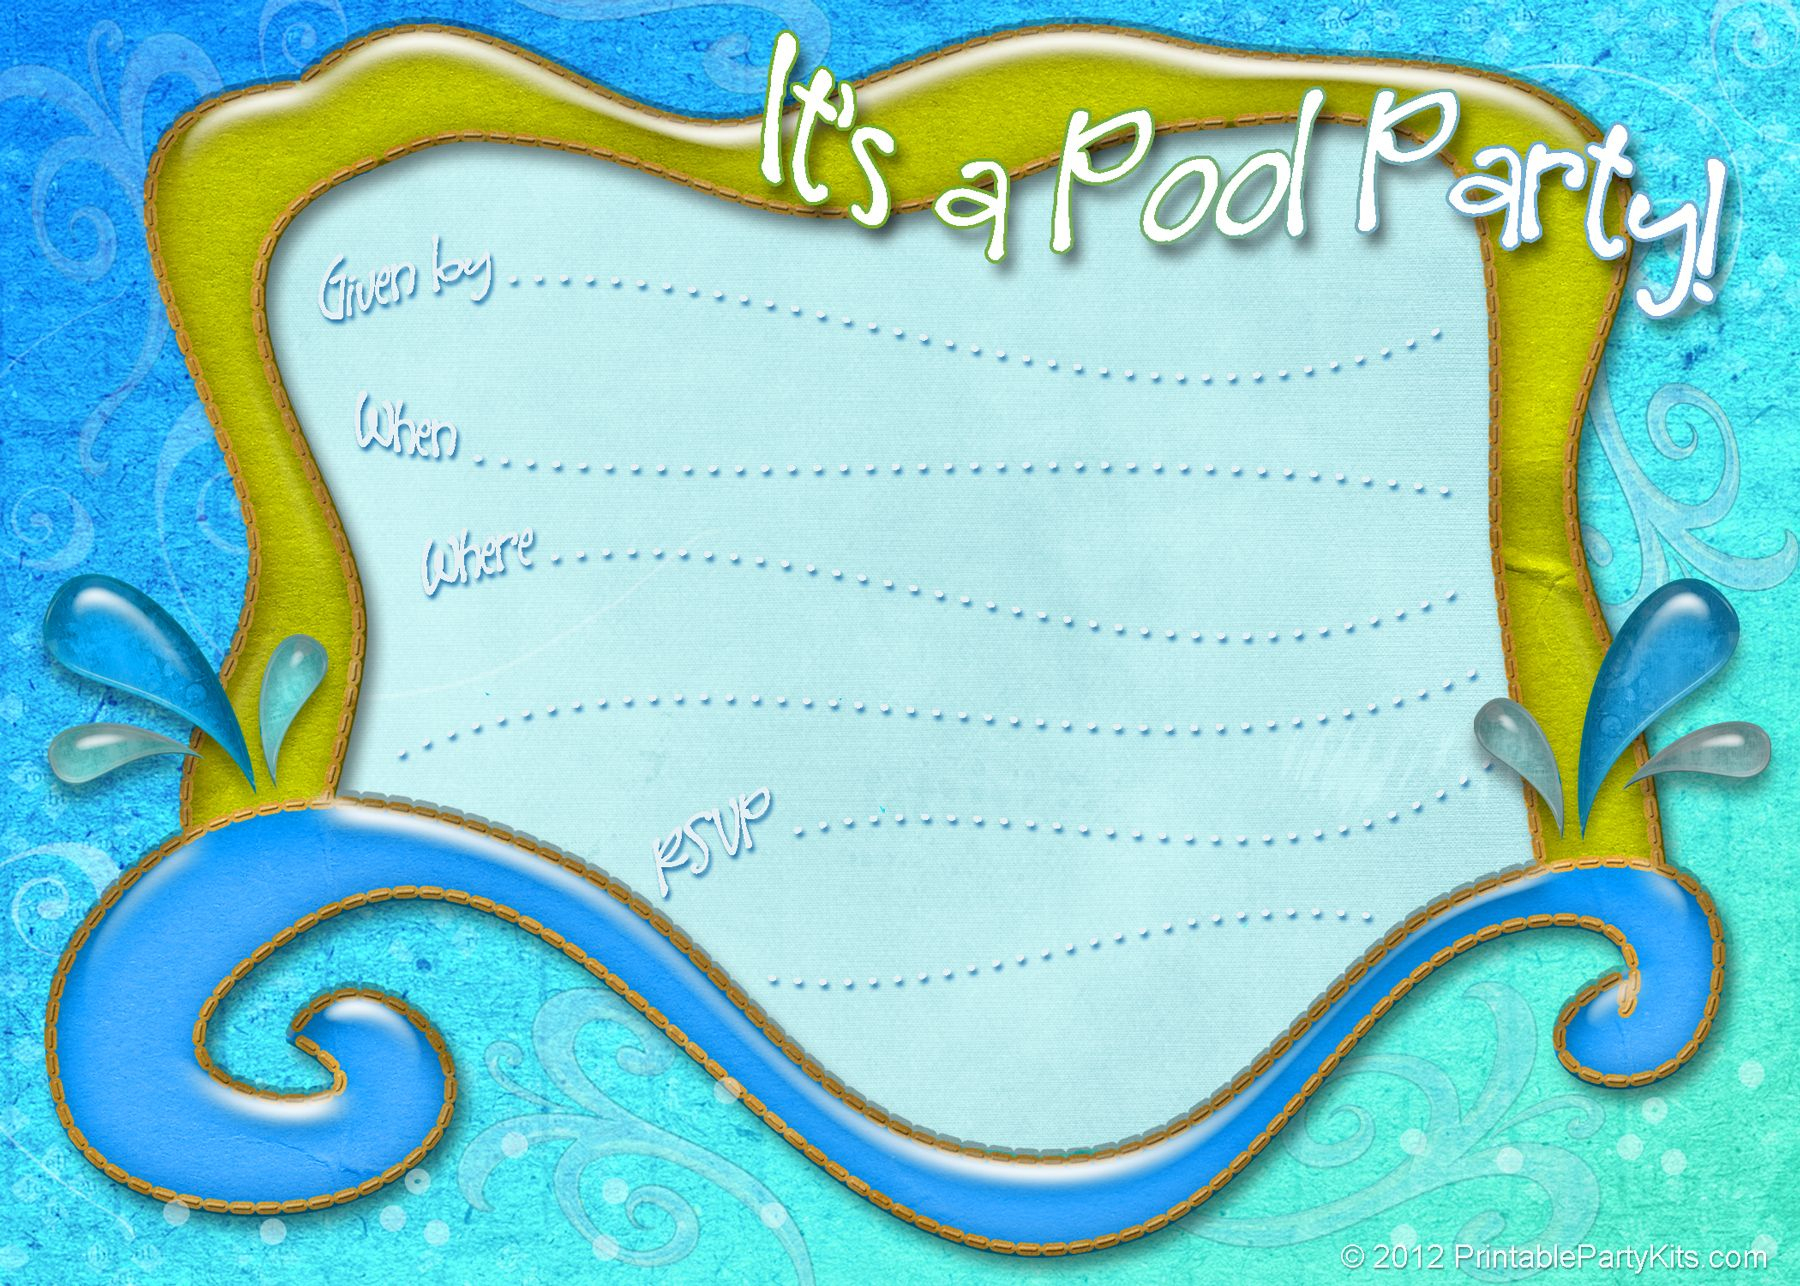 Free Printable Pool Party Invitation Template From - Free Printable Pool Party Invitation Cards